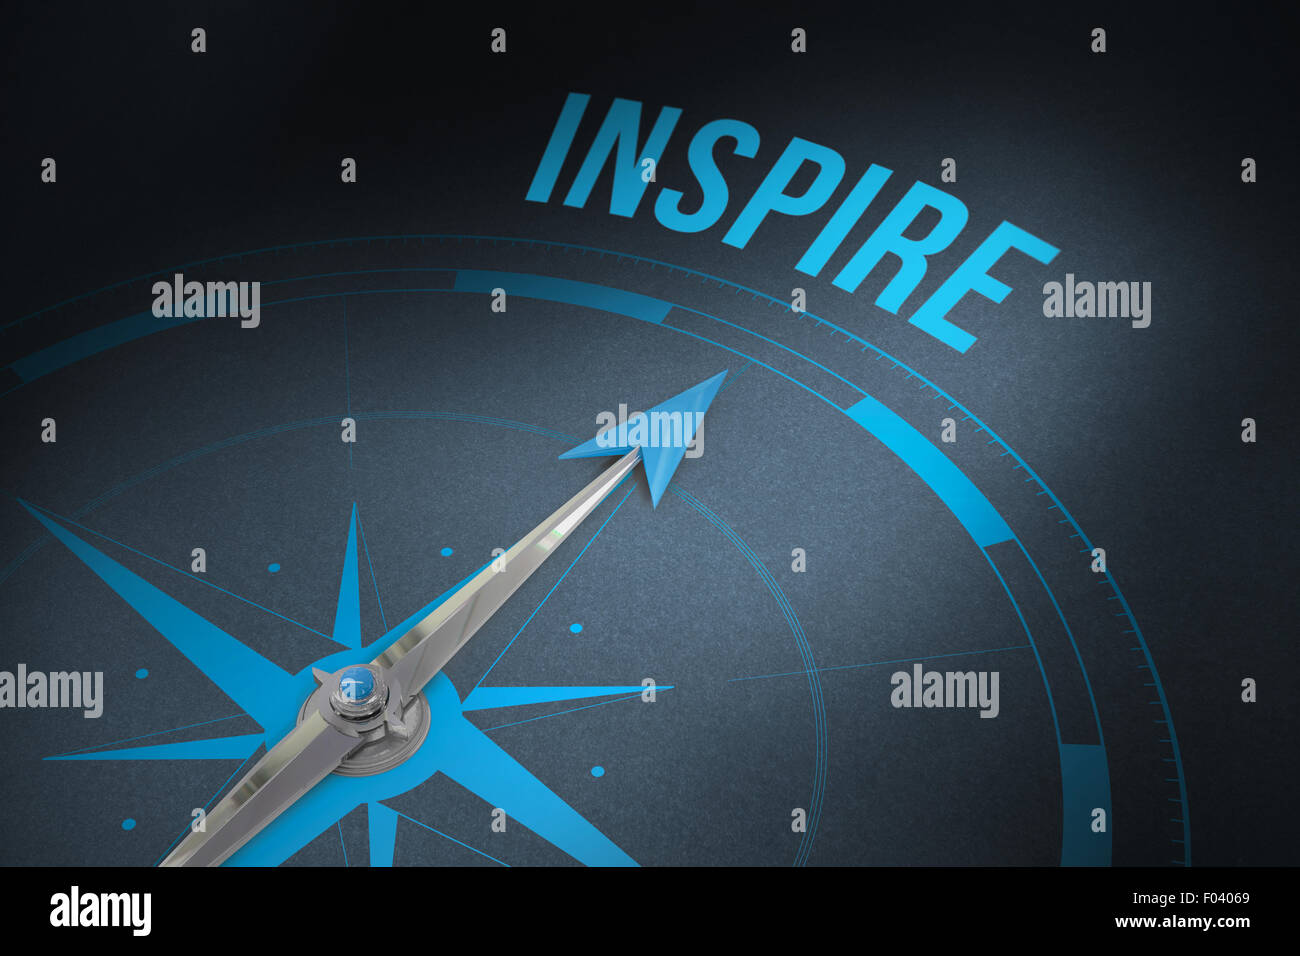 Inspire against grey background Stock Photo